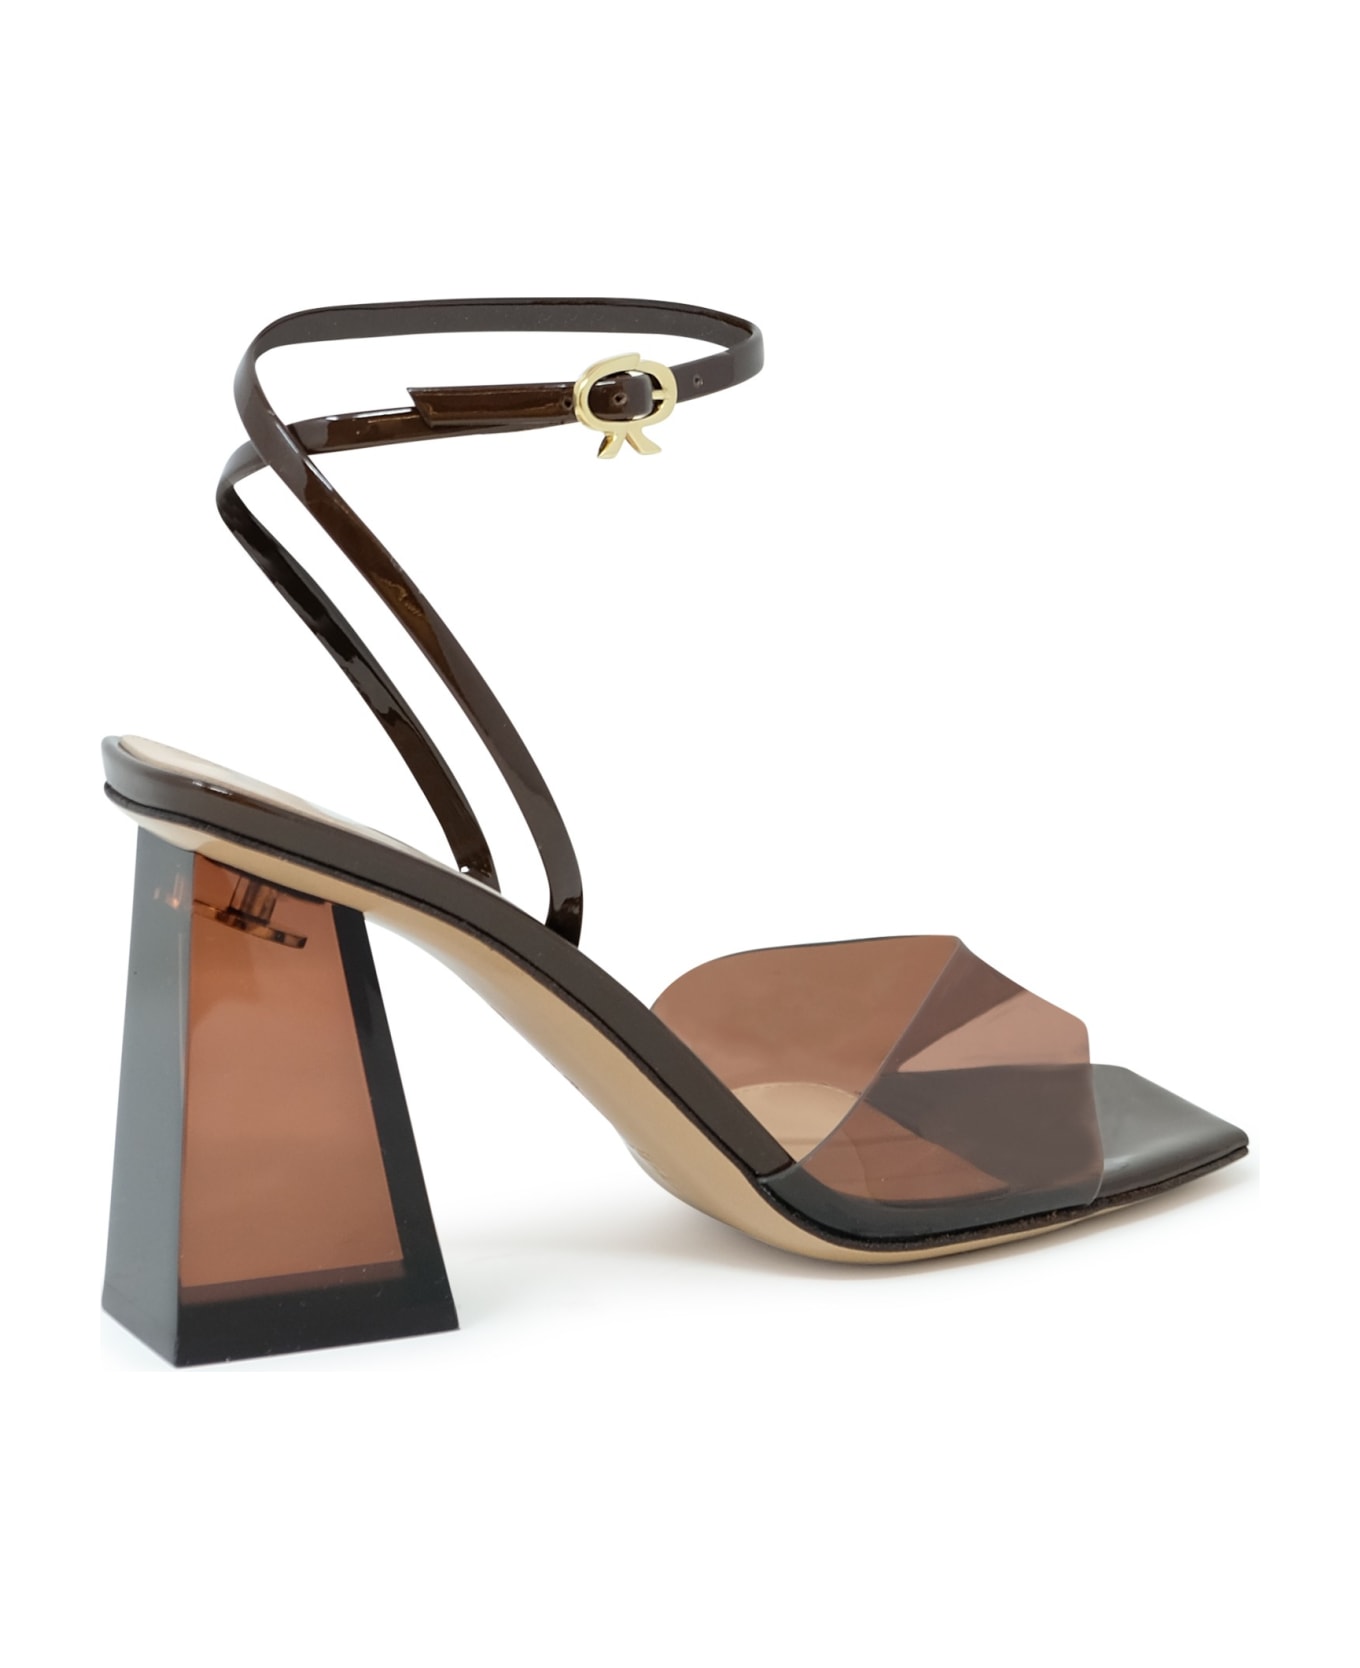 Gianvito Rossi Brown Glass Patent Leather Sandals - BROWN サンダル